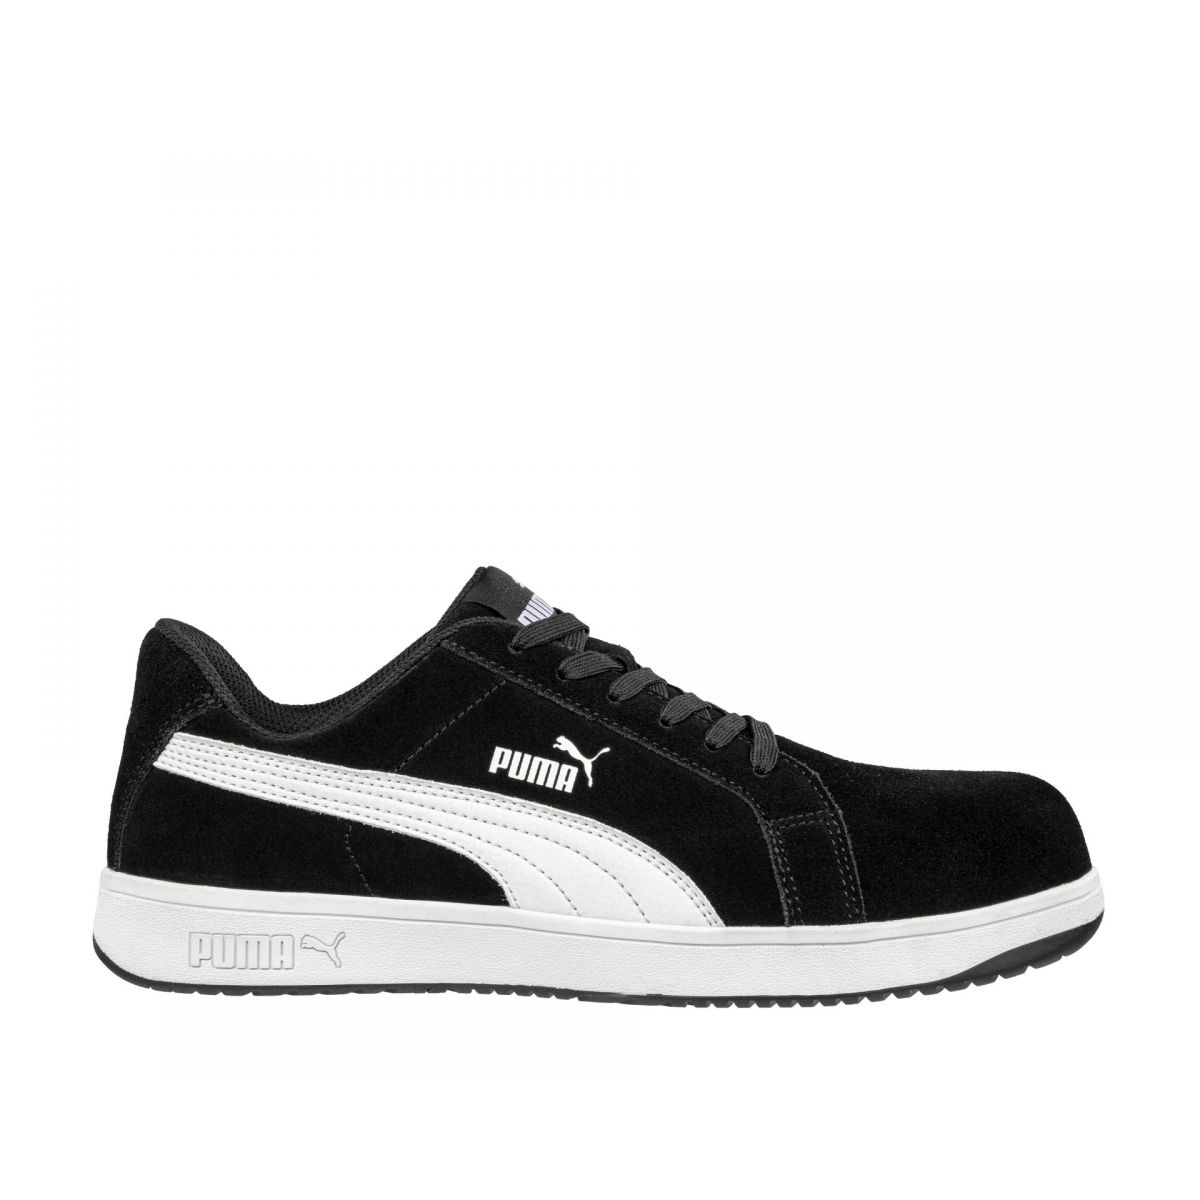 PUMA Safety Men's Iconic Low Composite Toe EH Work Shoes Black Suede - 640015 ONE SIZE BLACK - BLACK, 12